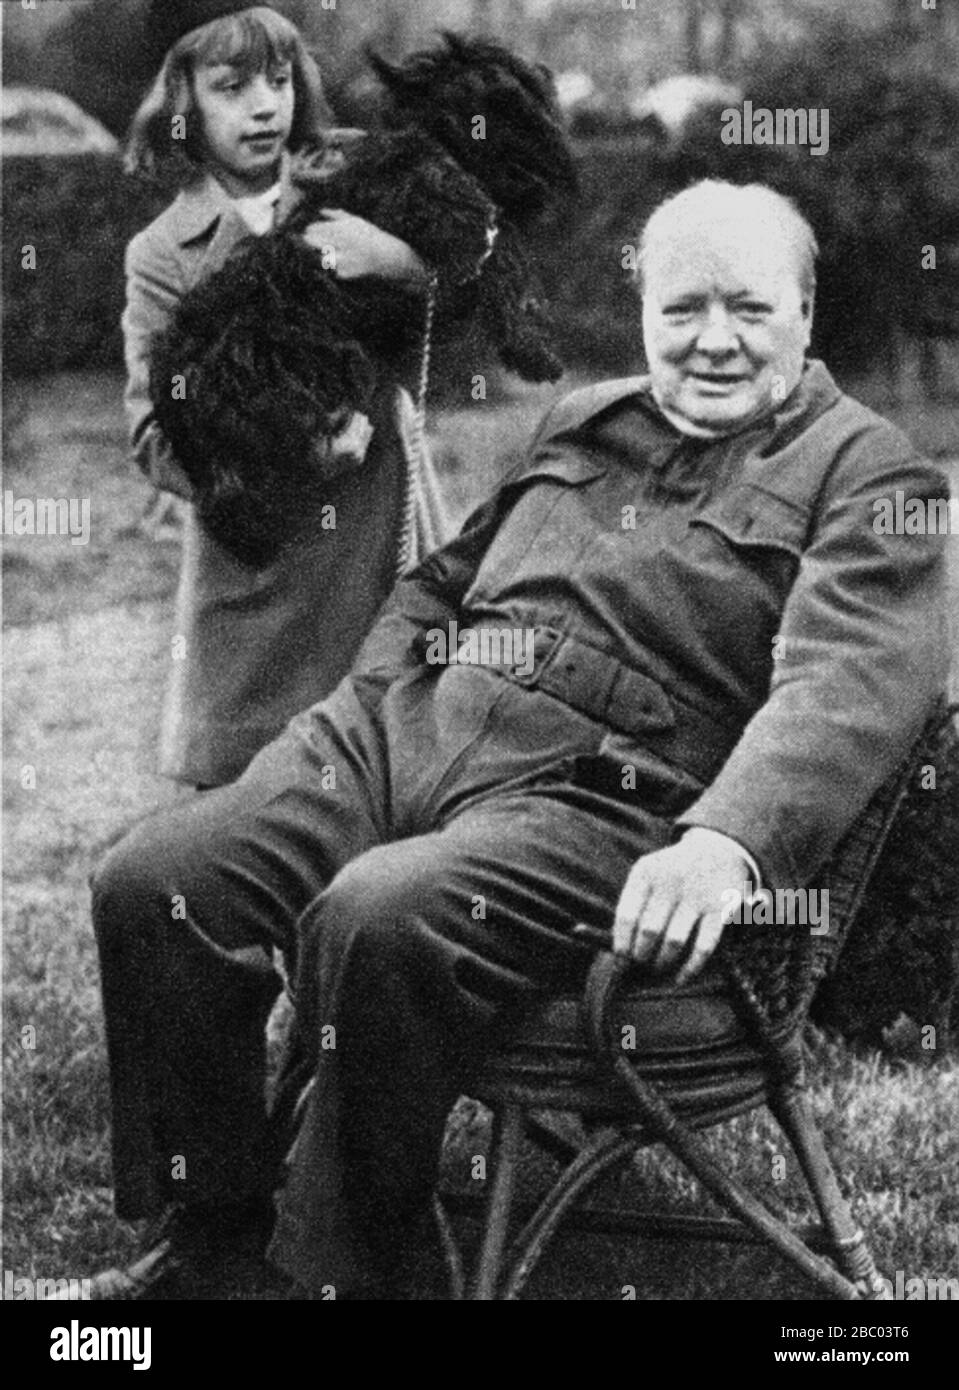 Churchill with Diana Hopkins, daughter of Harry Hopkins, Roosevelt's adviser on Foreign Policy. With them the President's dog,'Fala'. December 1941 Stock Photo